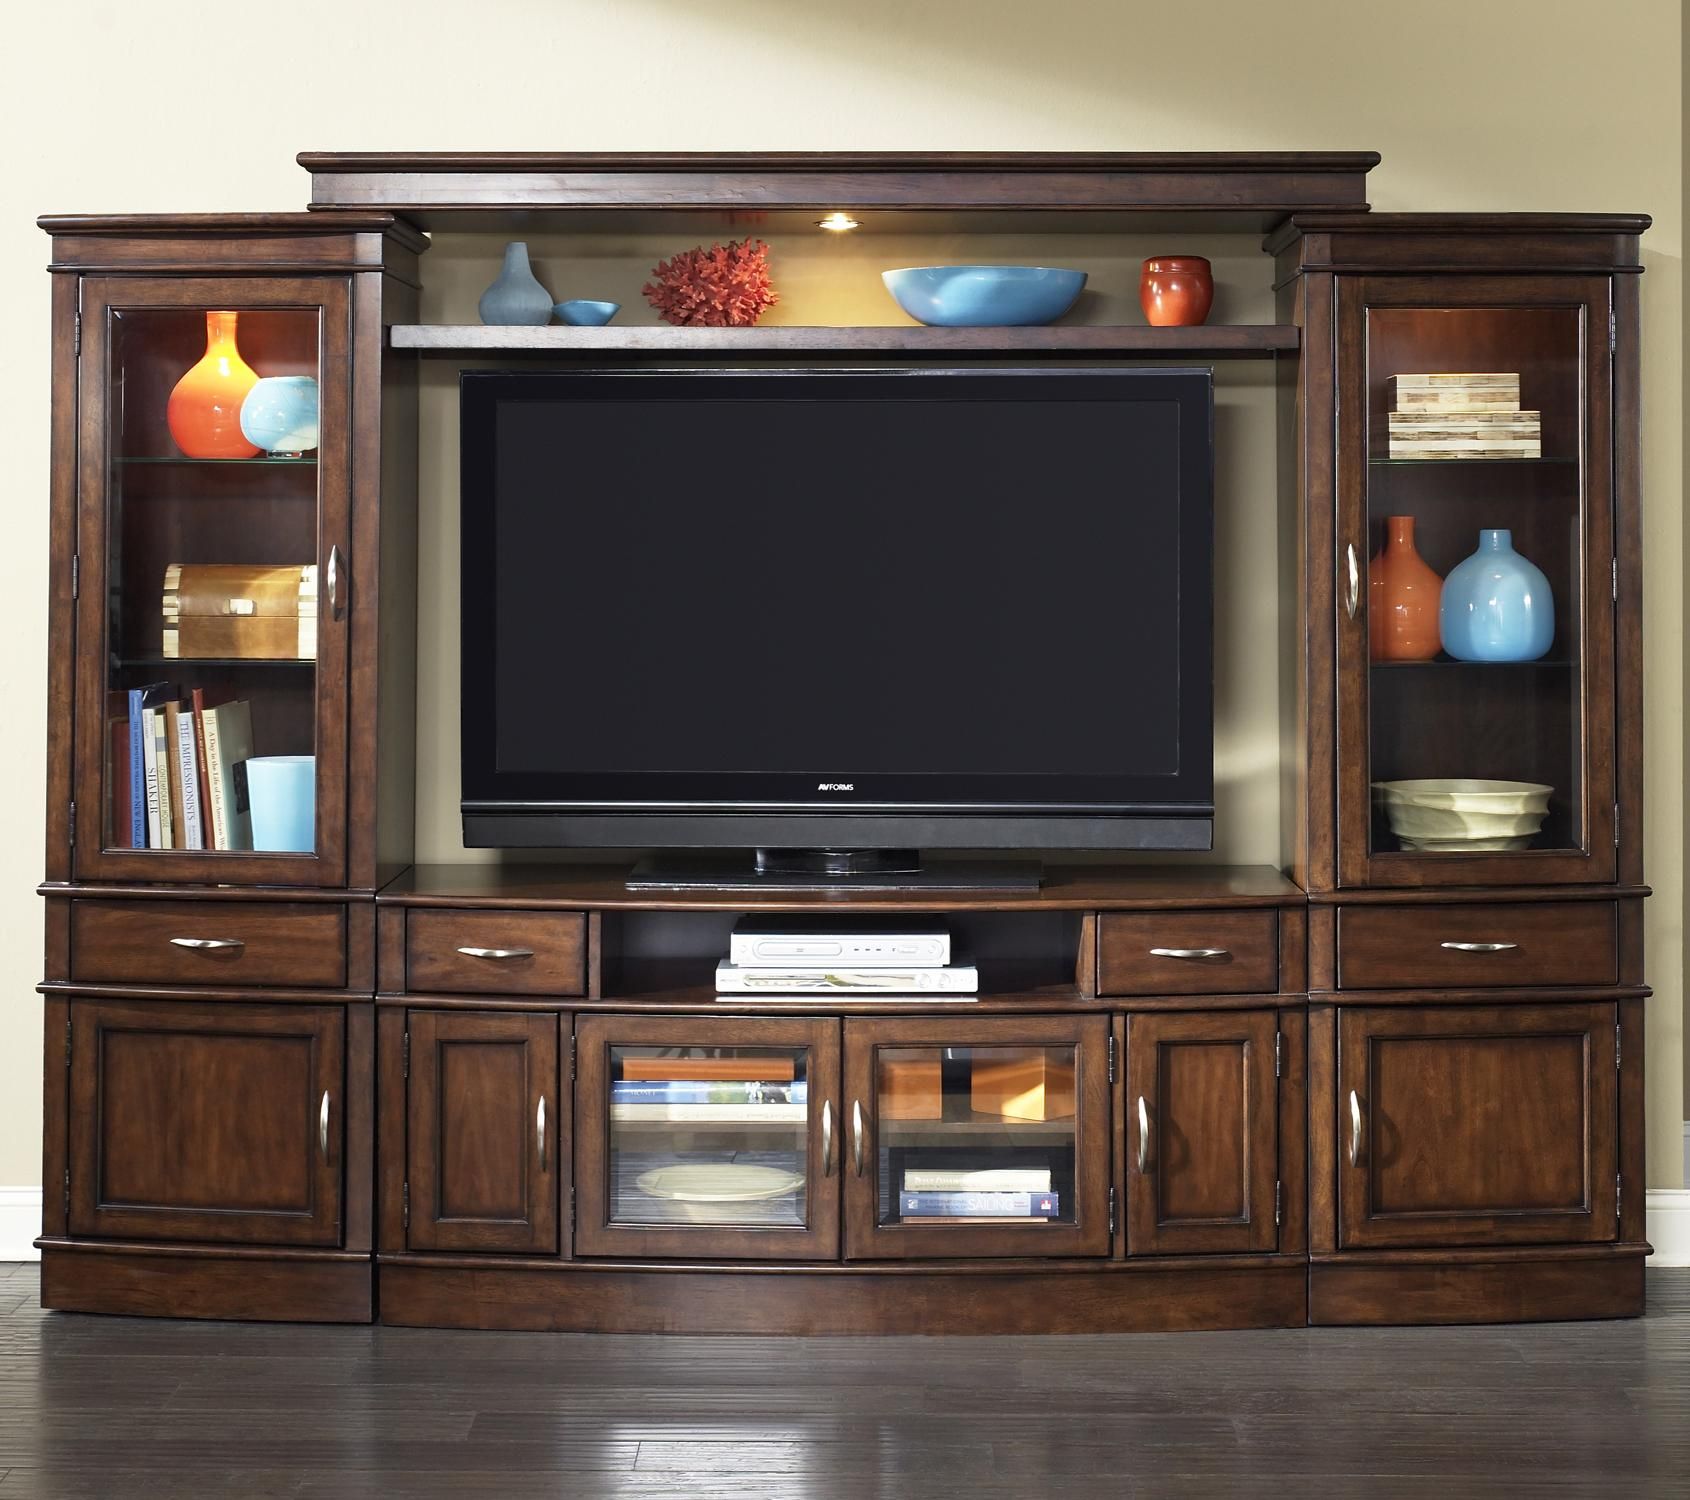 Complete Tv Entertainment Centerliberty Furniture | Wolf Furniture With Regard To Wide Entertainment Centers (Gallery 2 of 20)